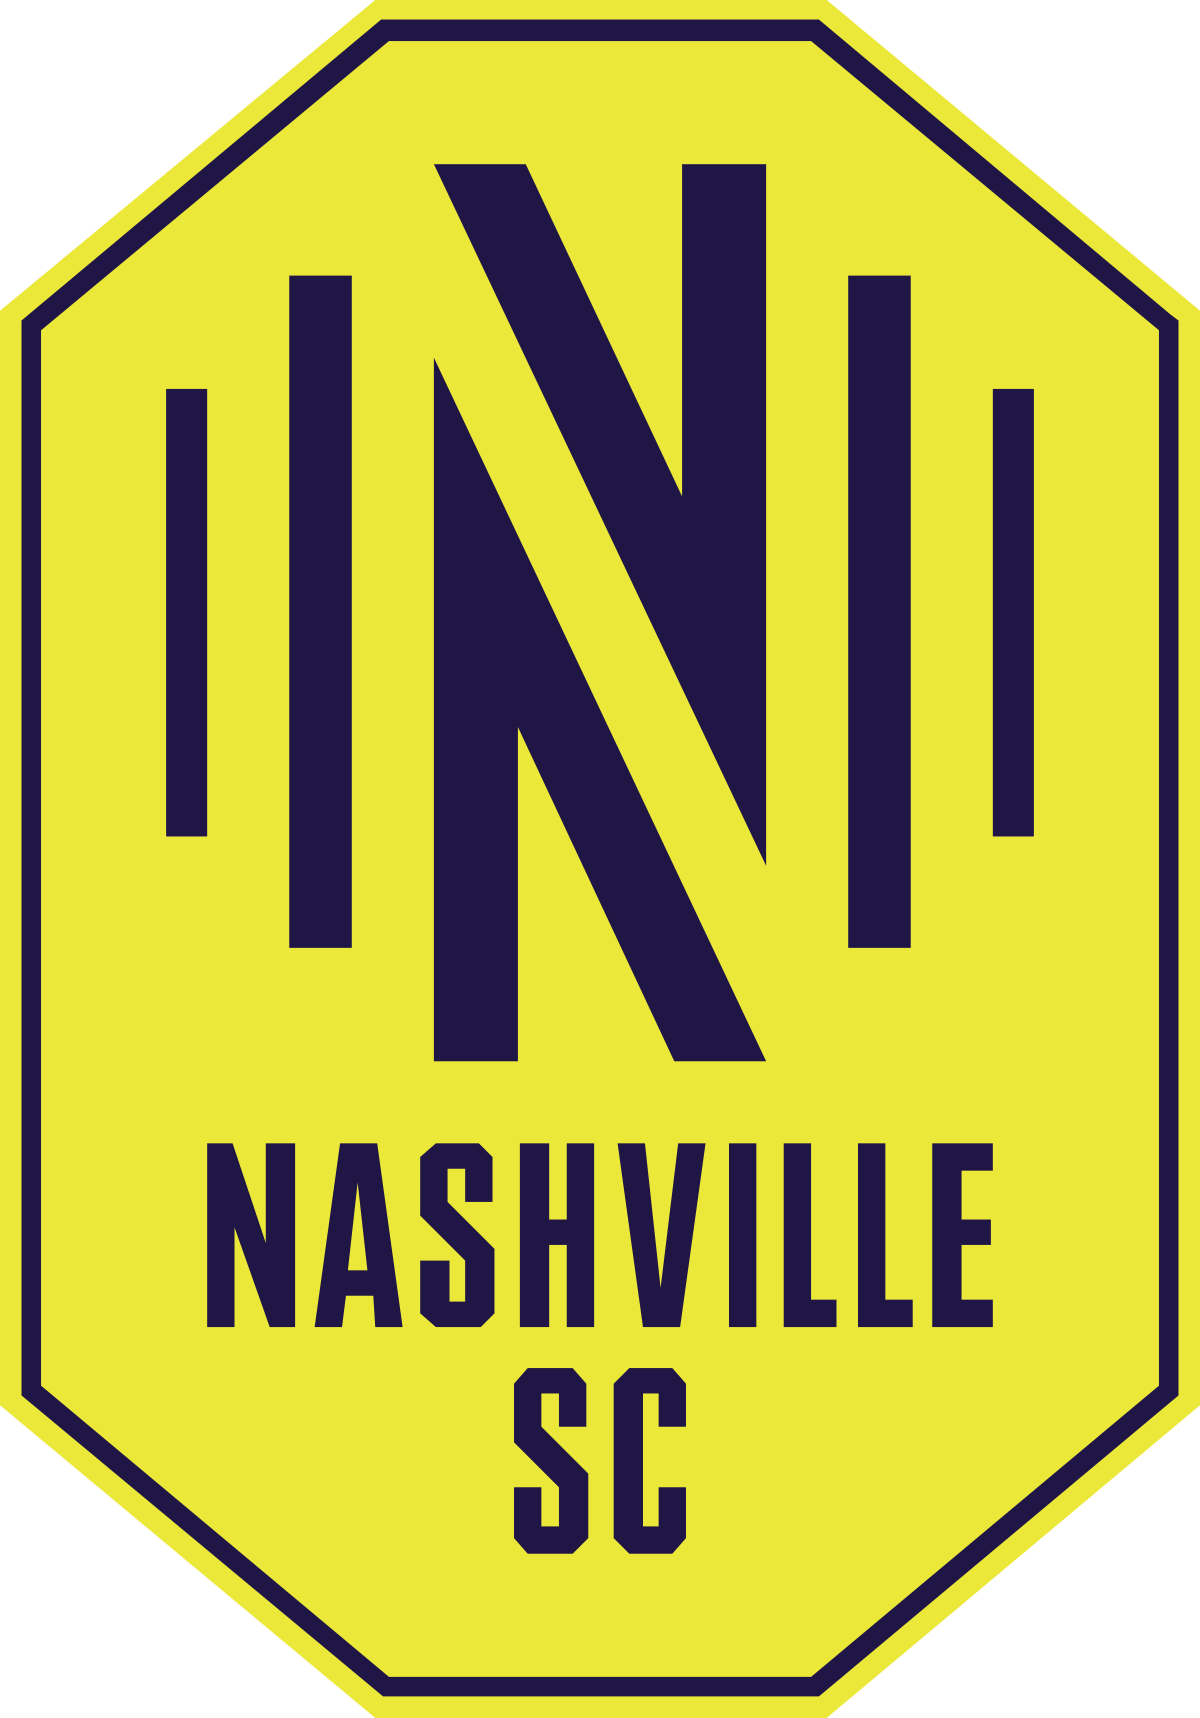 Reese Witherspoon Joins Ownership Group for Nashville Soccer Club